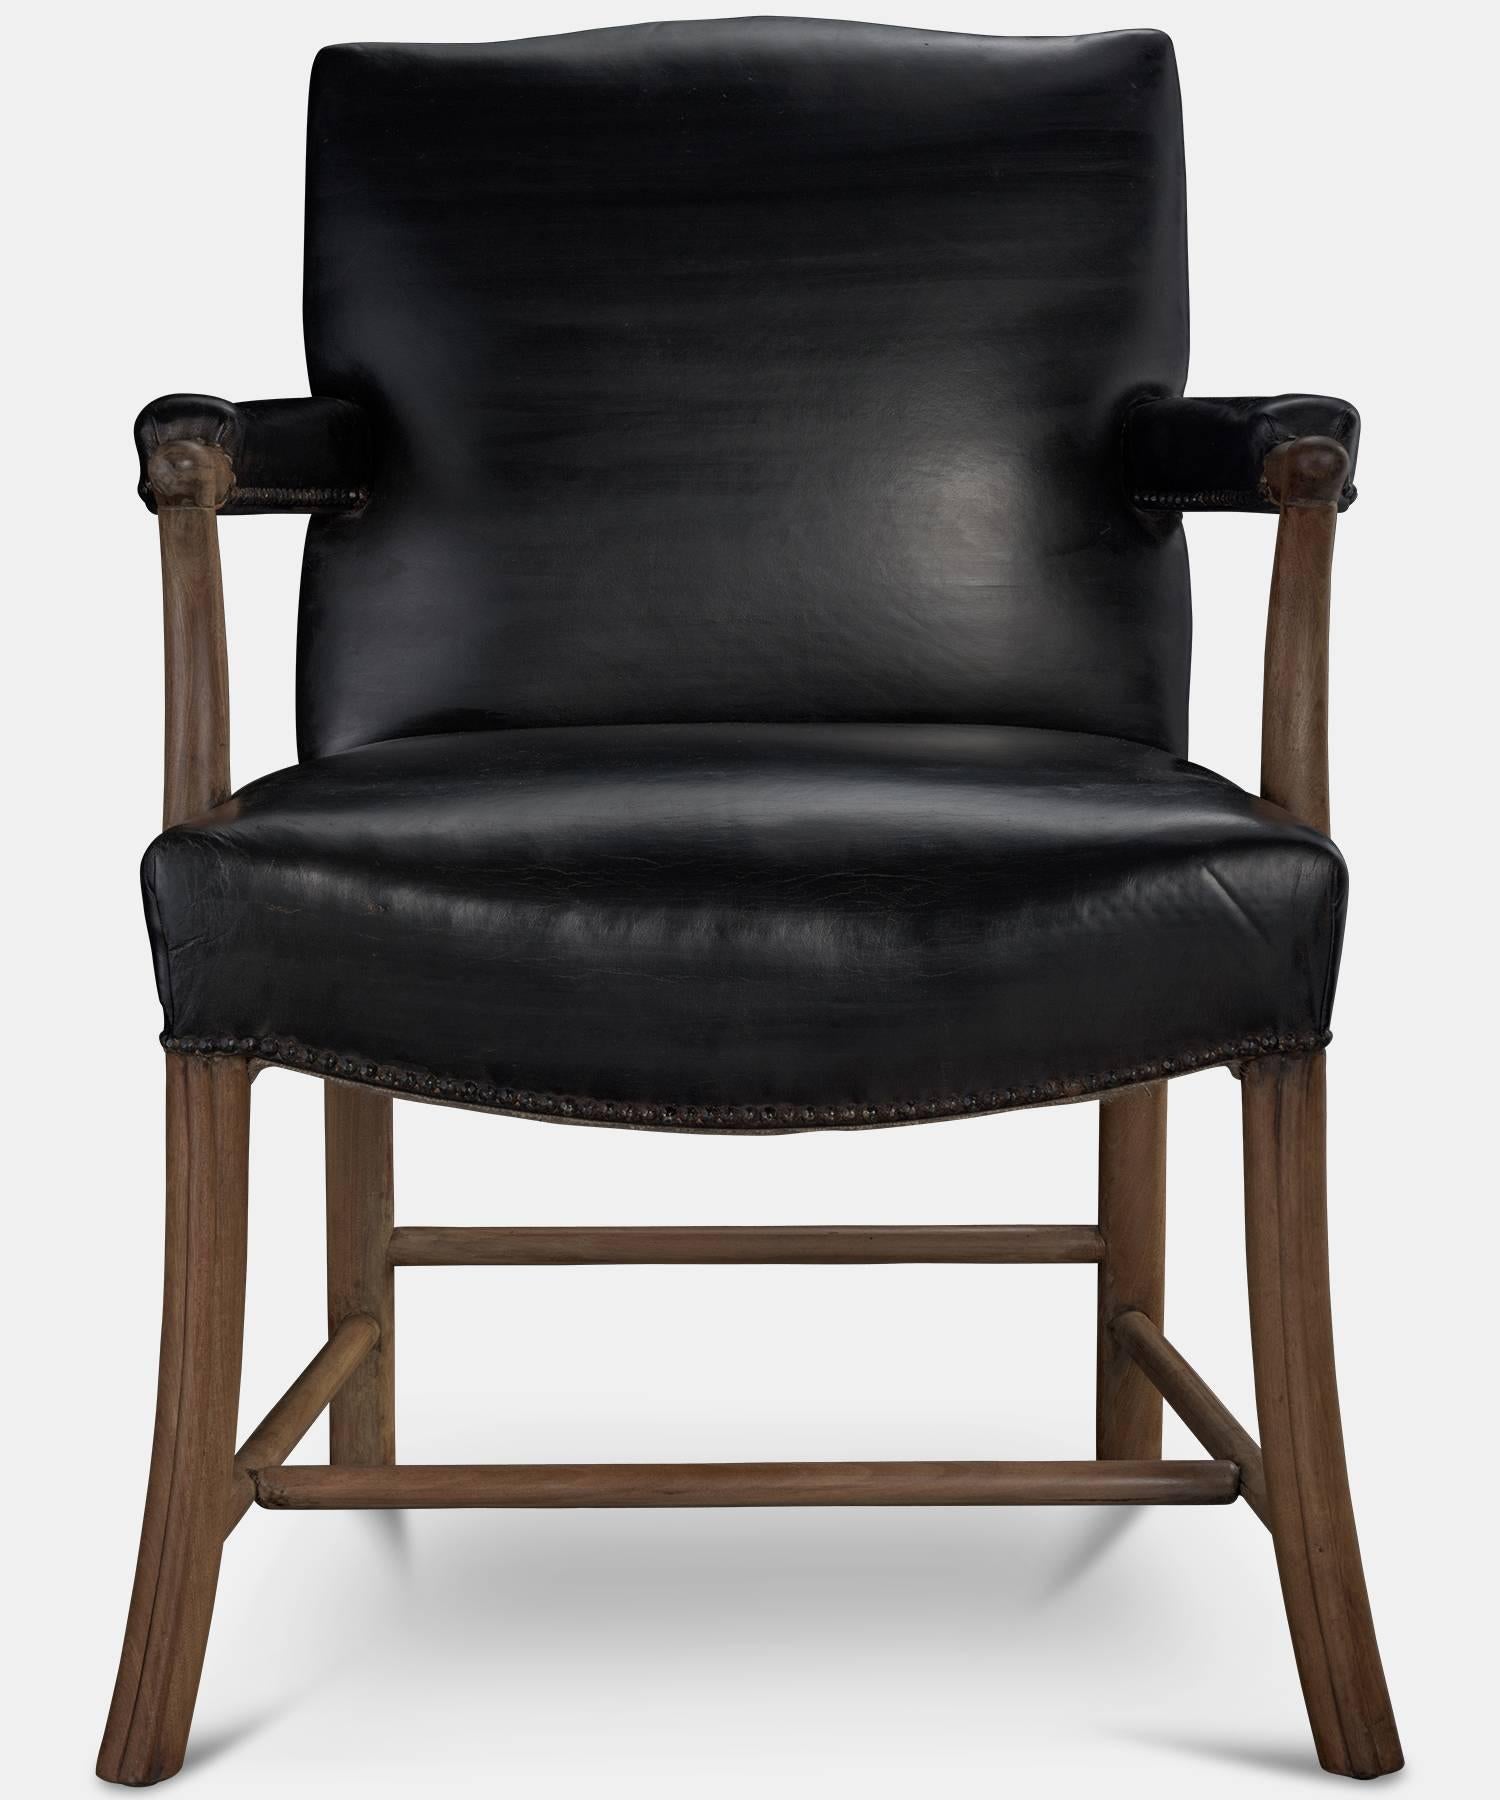 Leather and oak armchair, circa 1950.

Original thick black leather upholstery, with carved wooden frame.